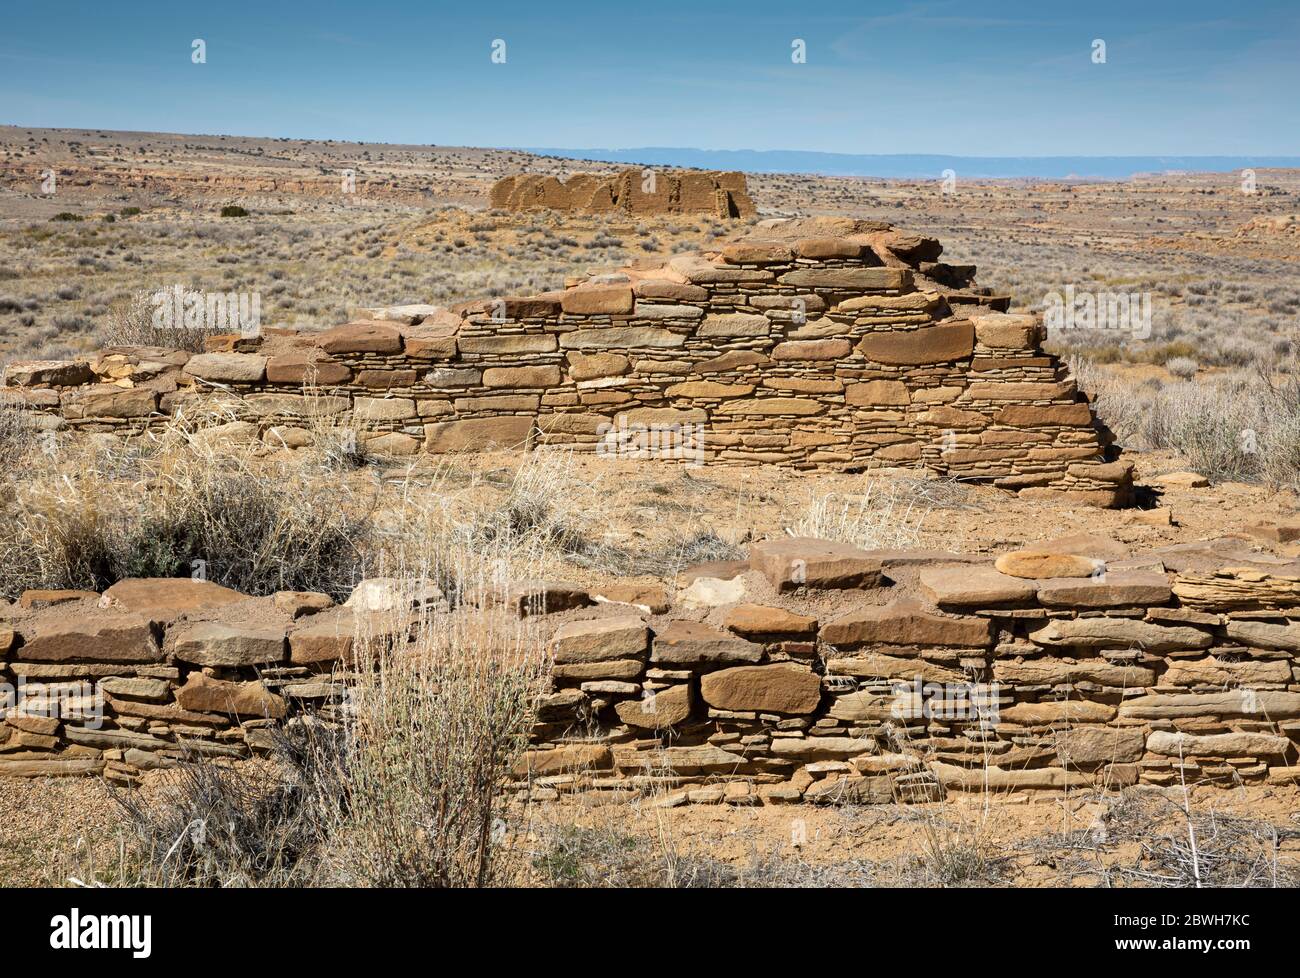 NM00367-00...NEW MEXICO - Remaining walls of Peublo Alto, built about 1,000 years ago, now preserved in Chaco Culture National Historic Park. Stock Photo